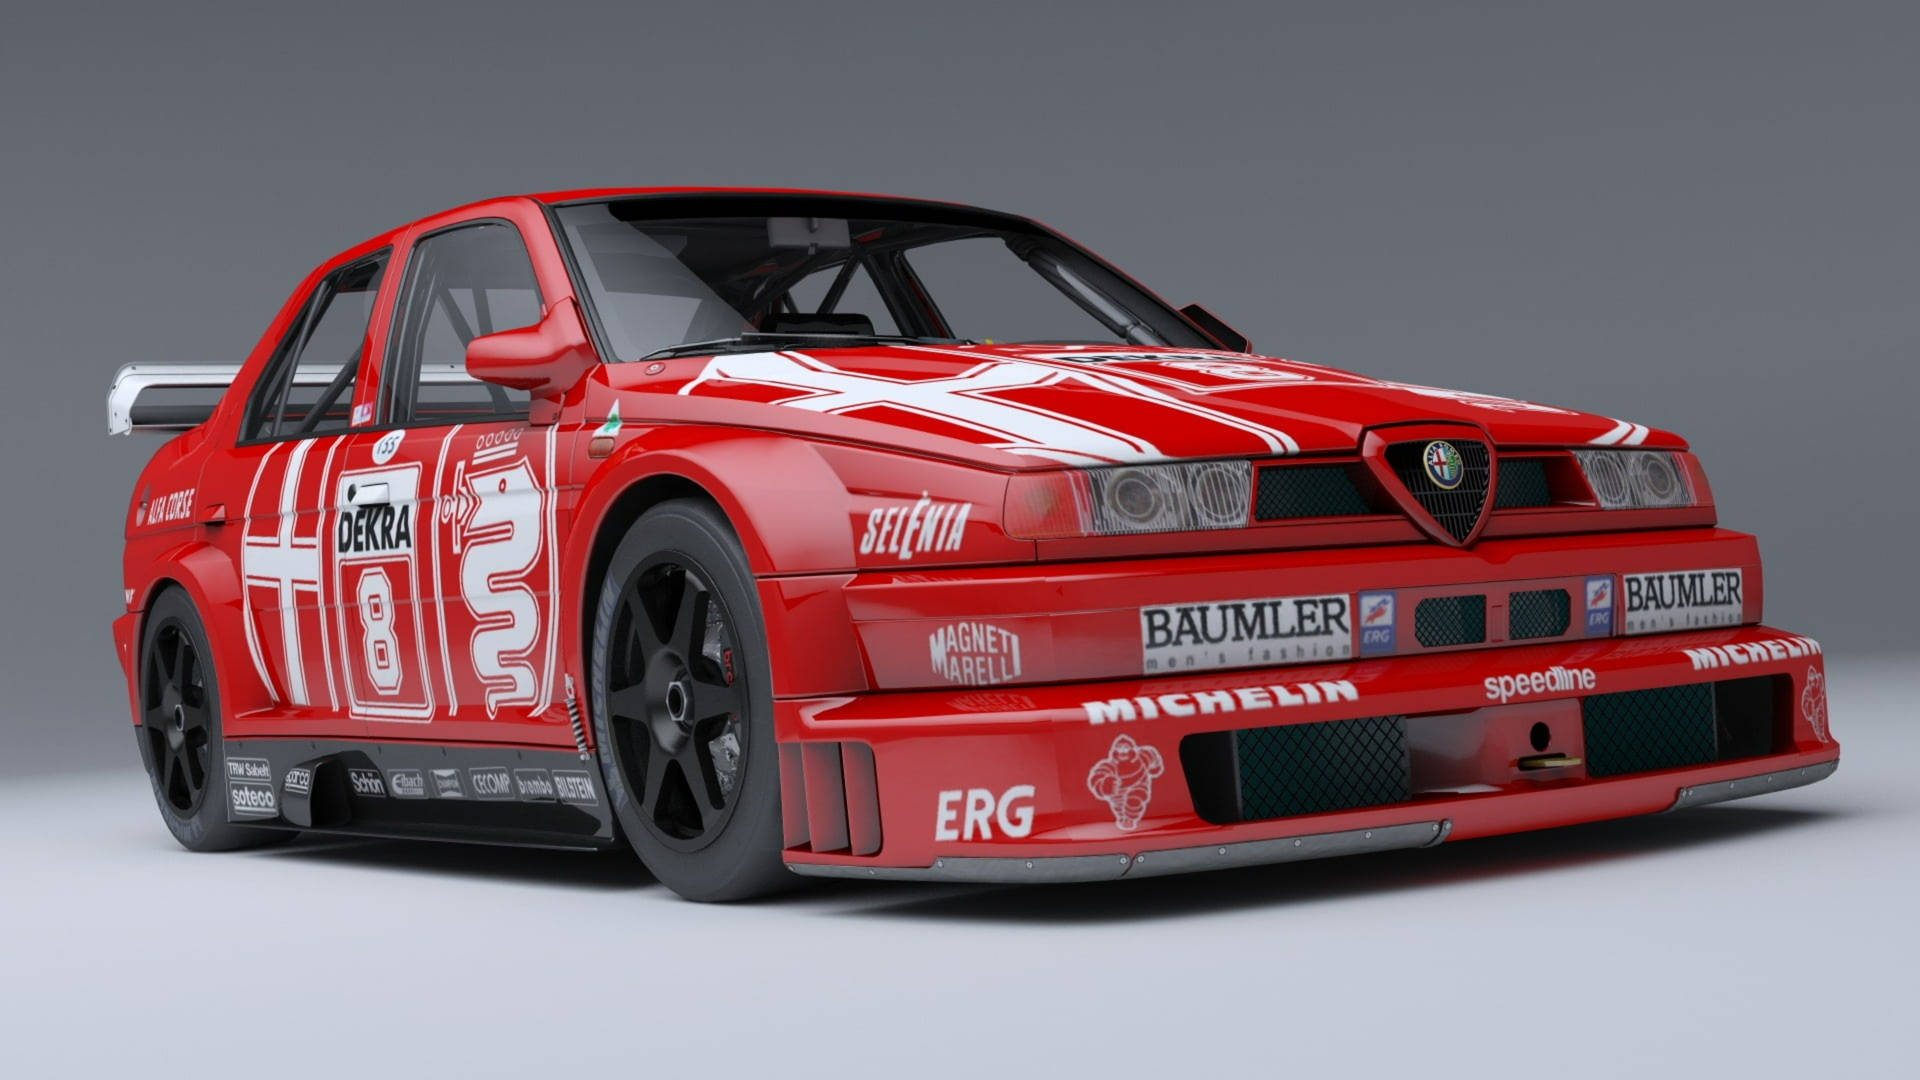 Rev Up Your Engines With An Alfa Romeo 155 V6 Ti Background